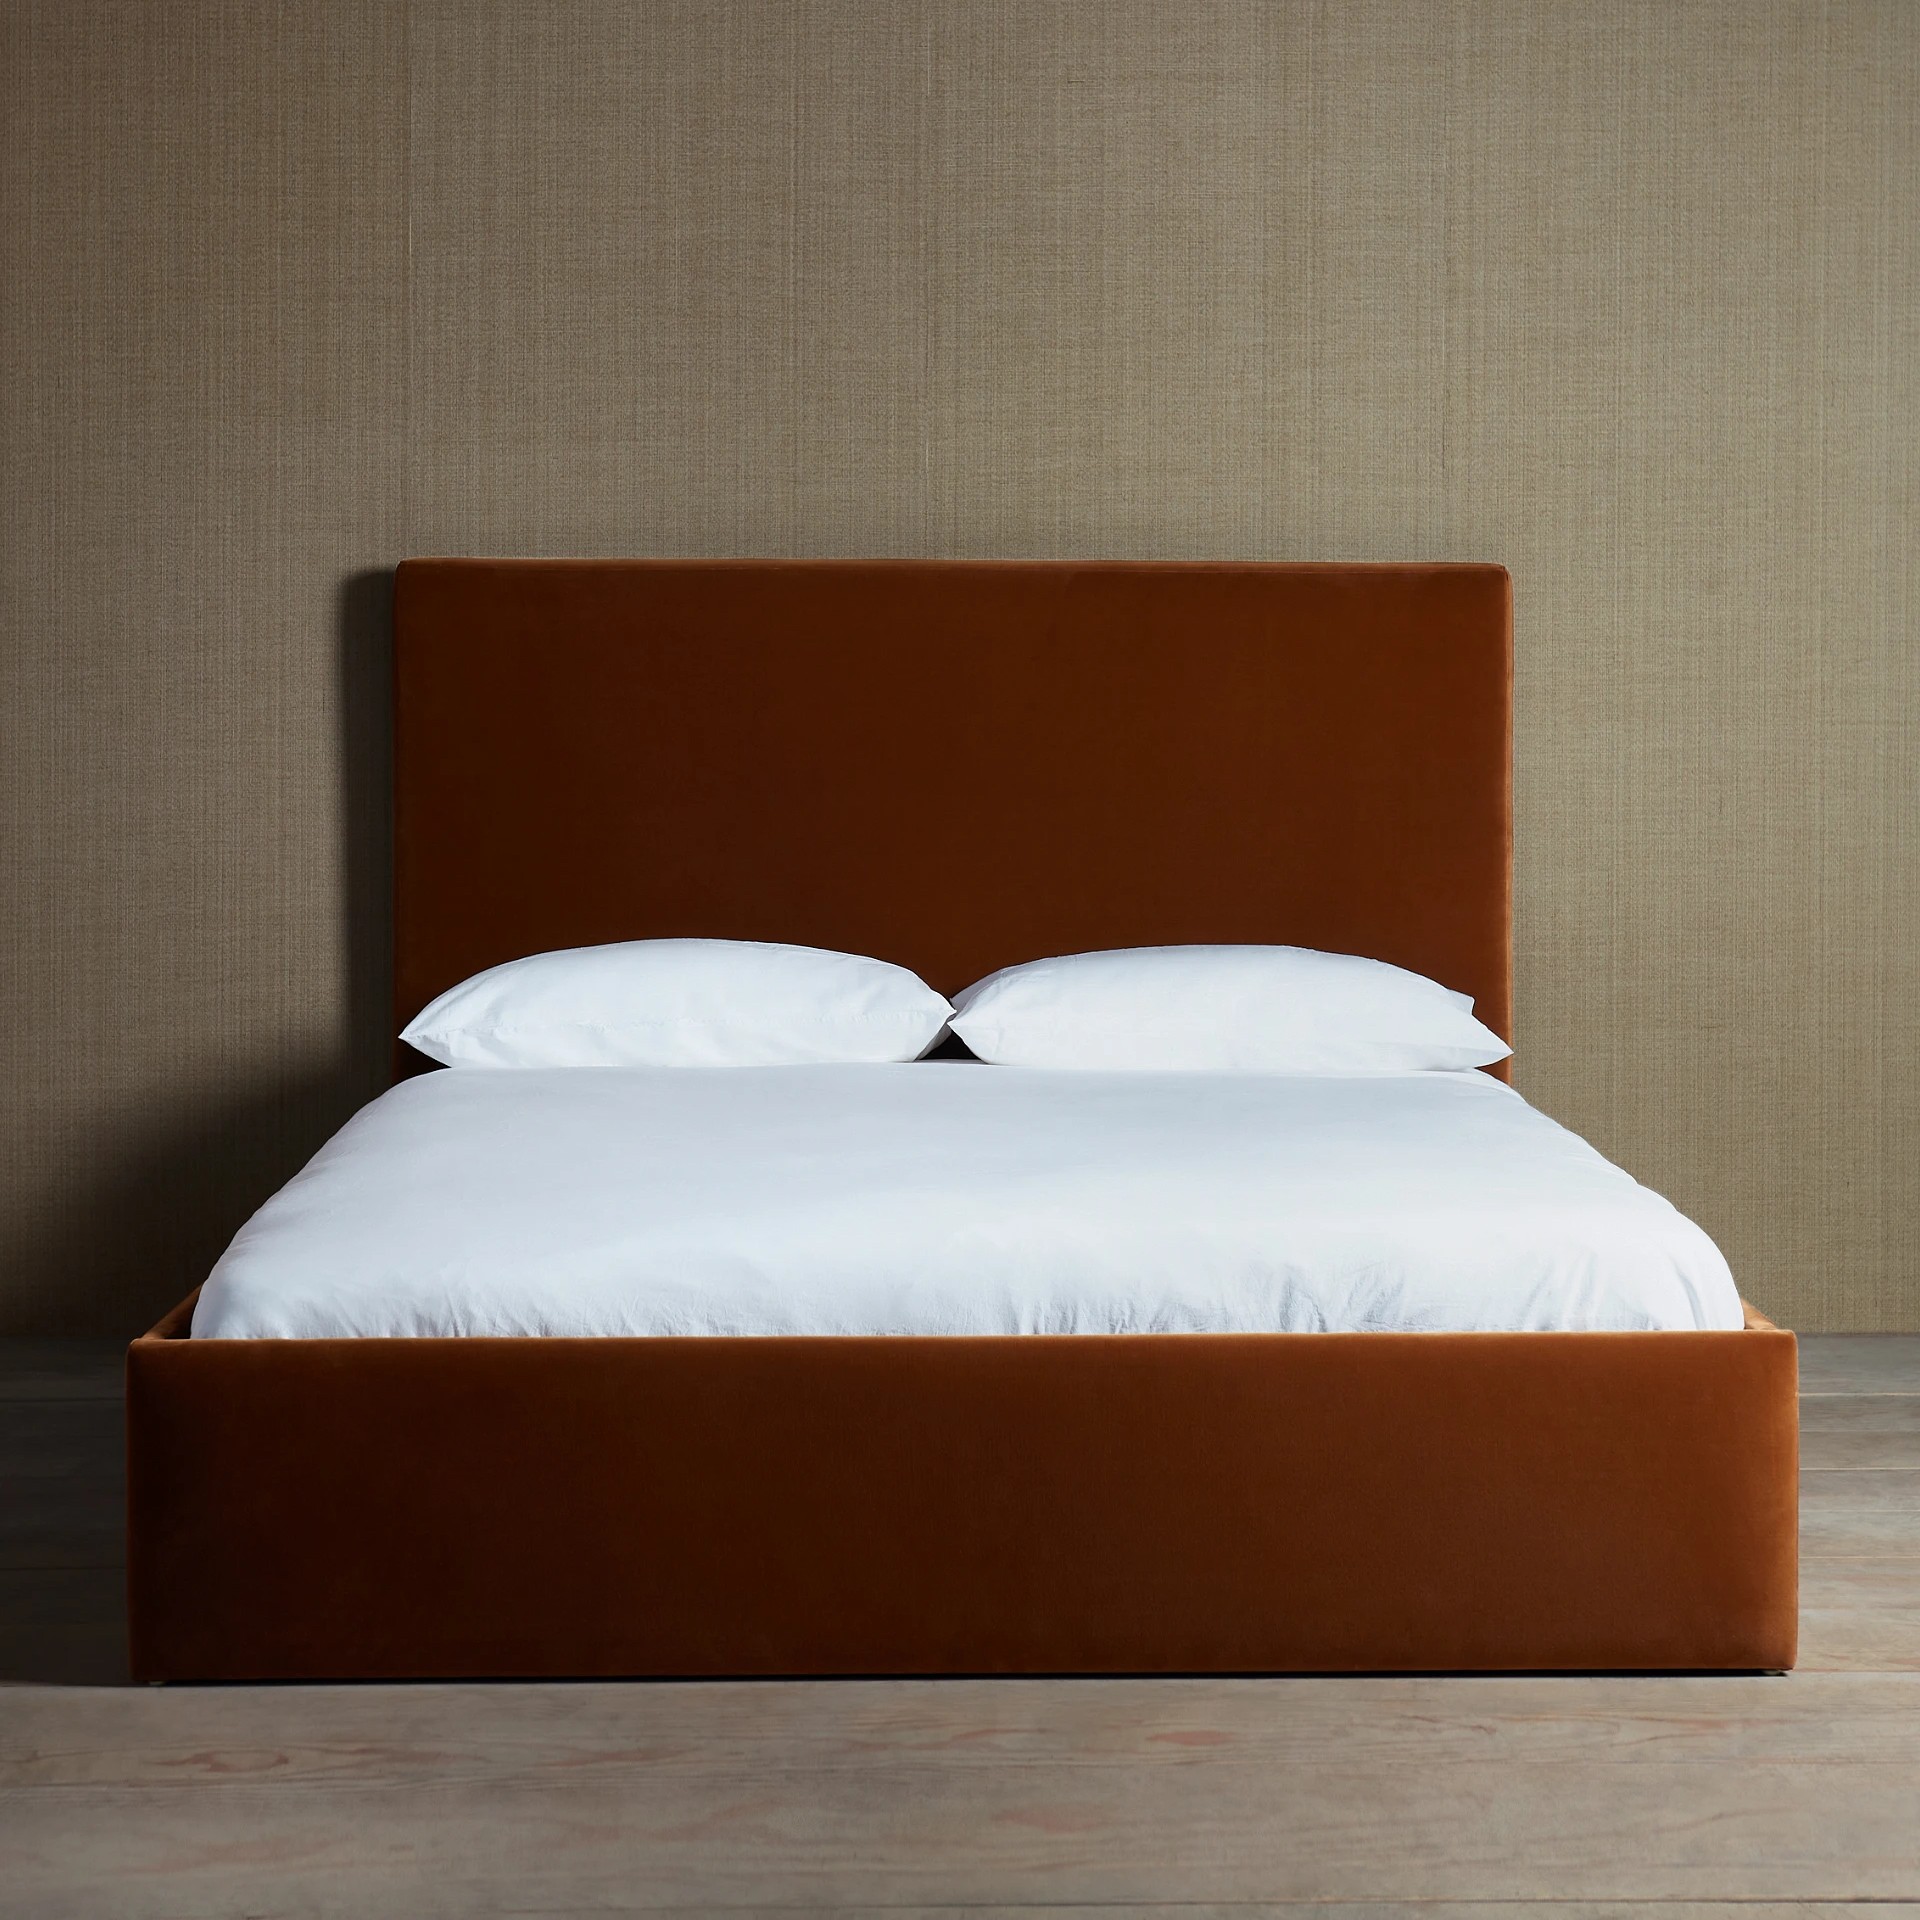 The image of an Signature Upholstered Bed product